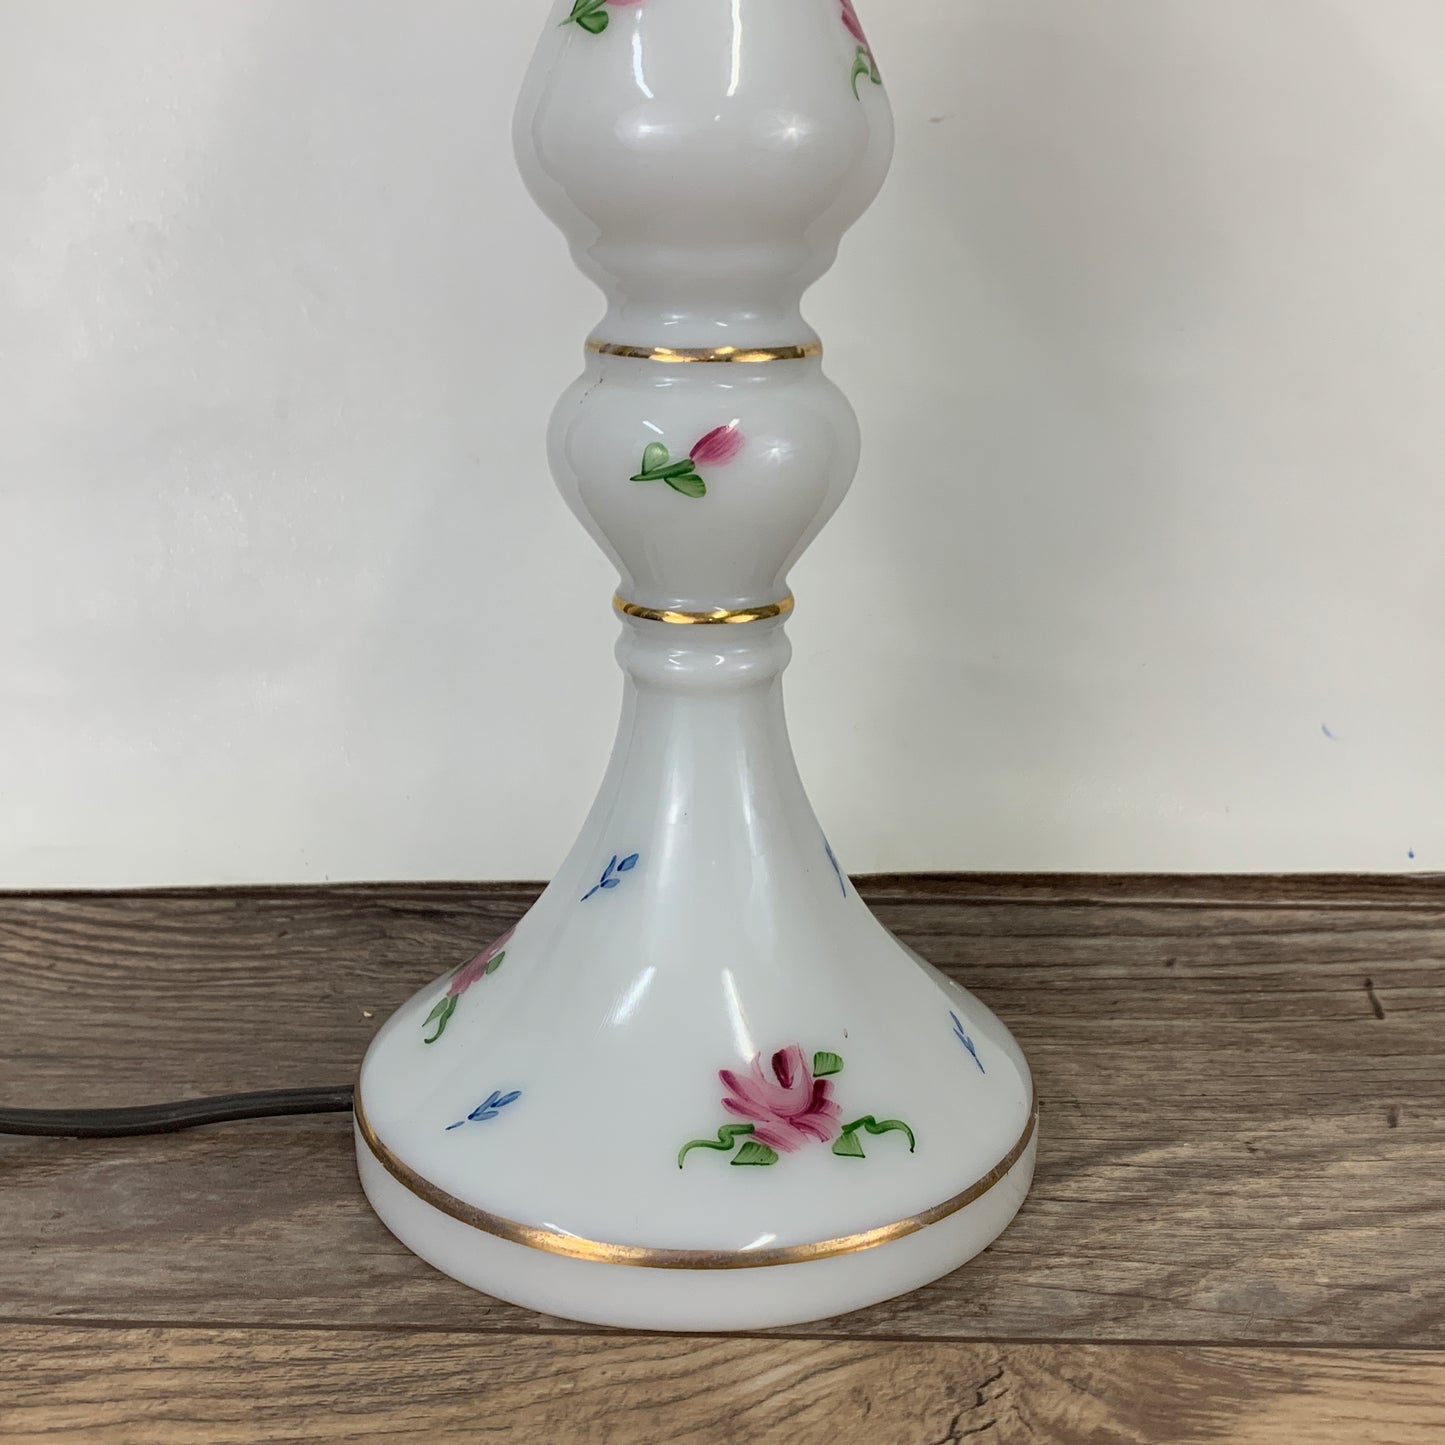 Vintage Milk Glass Table Lamp with Hand Painted Floral Design